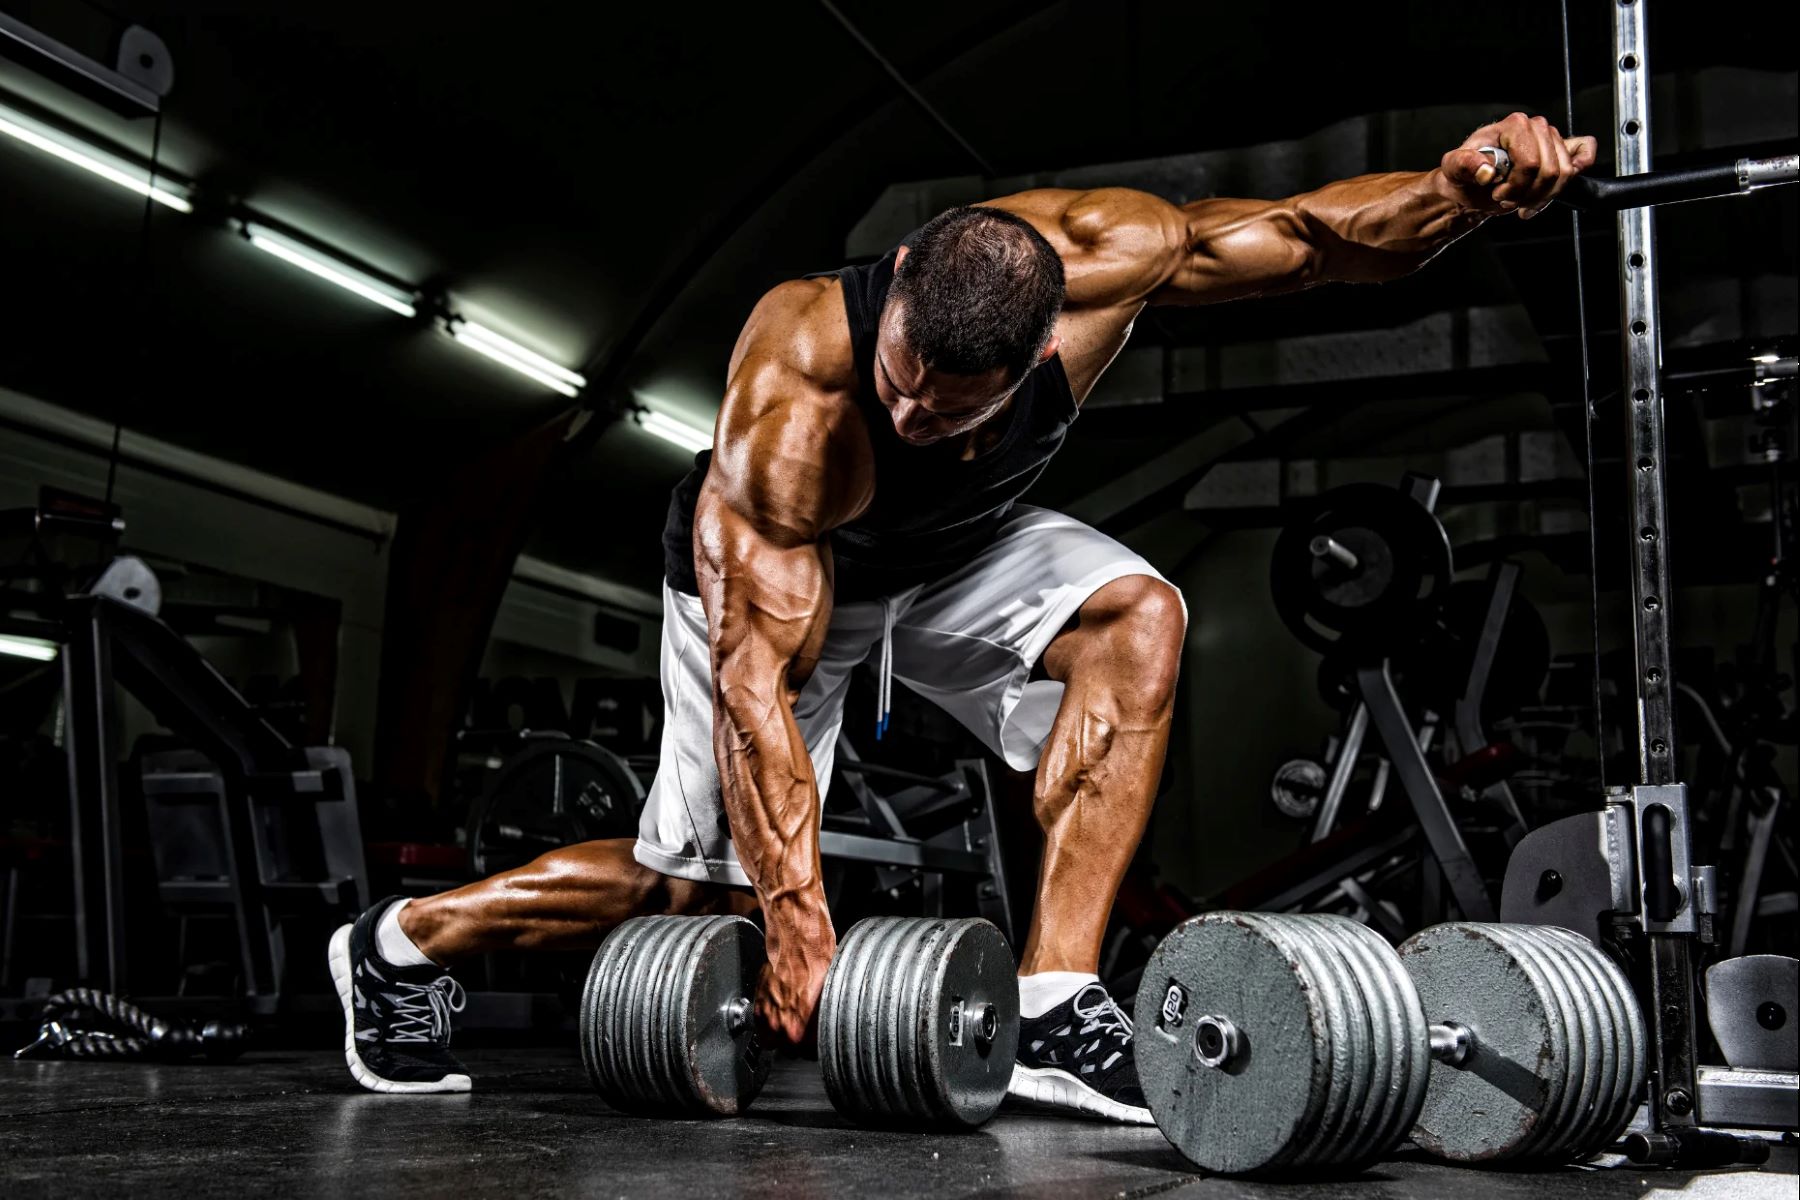 Maximize Your Gains: Take Creatine Before And After Your Workout!